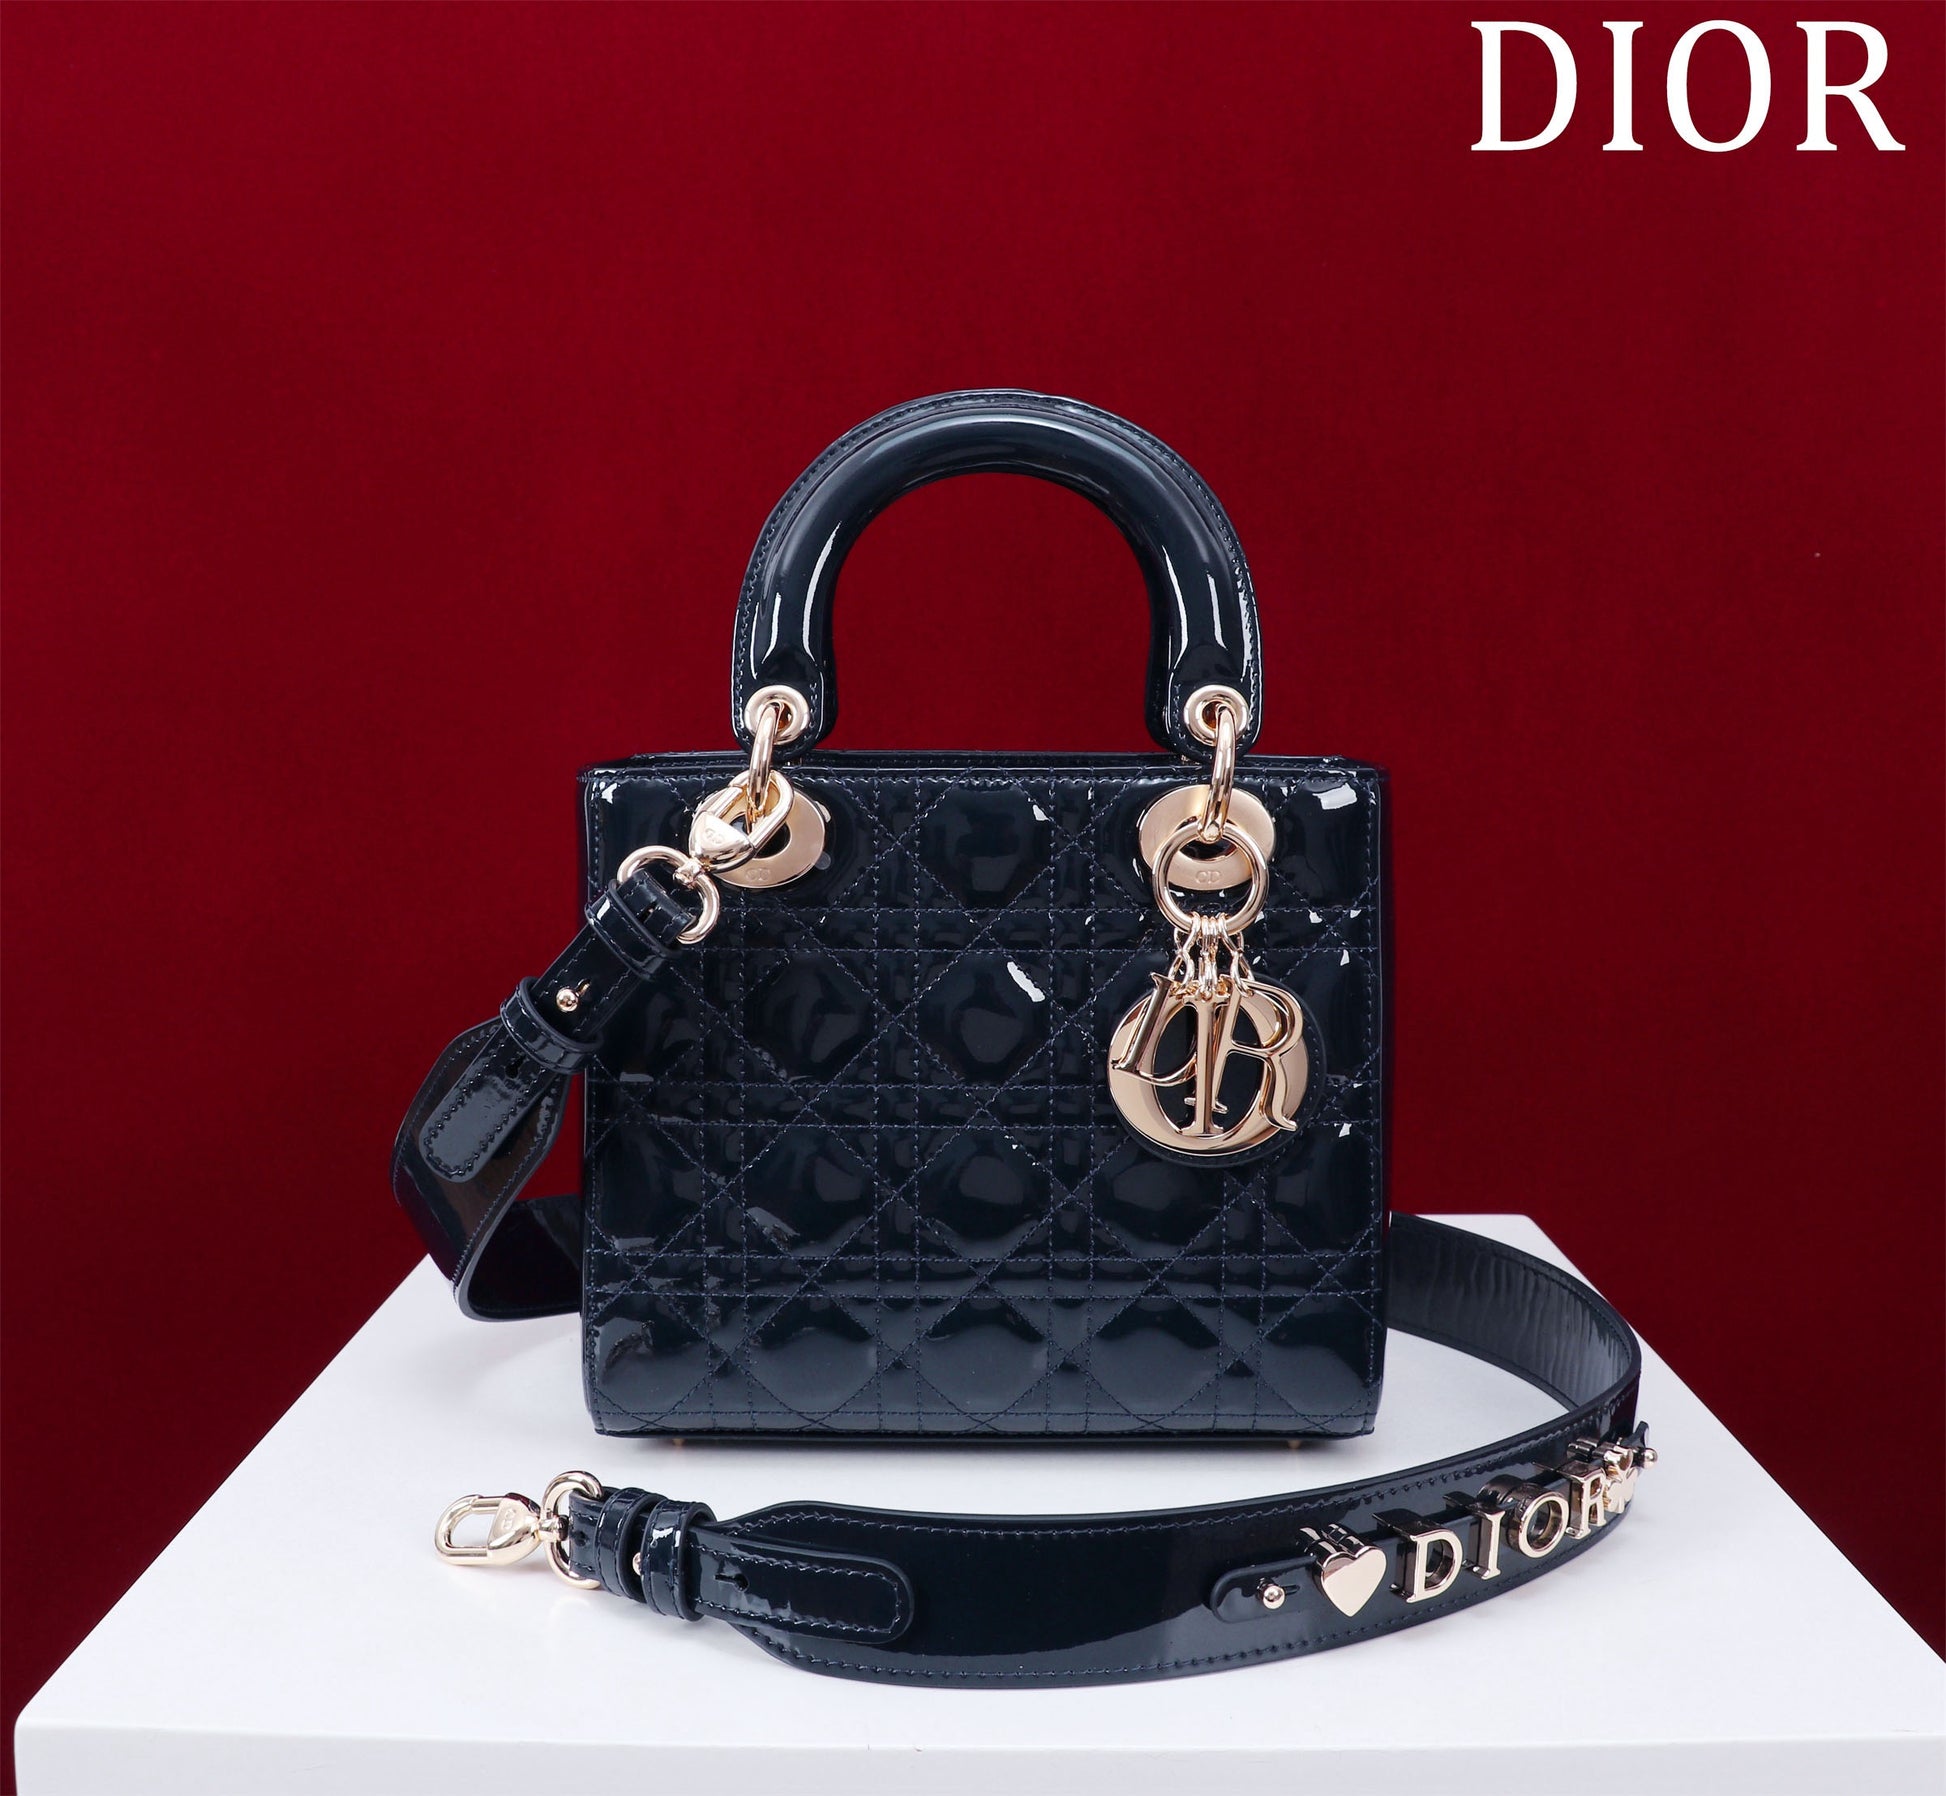 Blue small patent leather lady dior